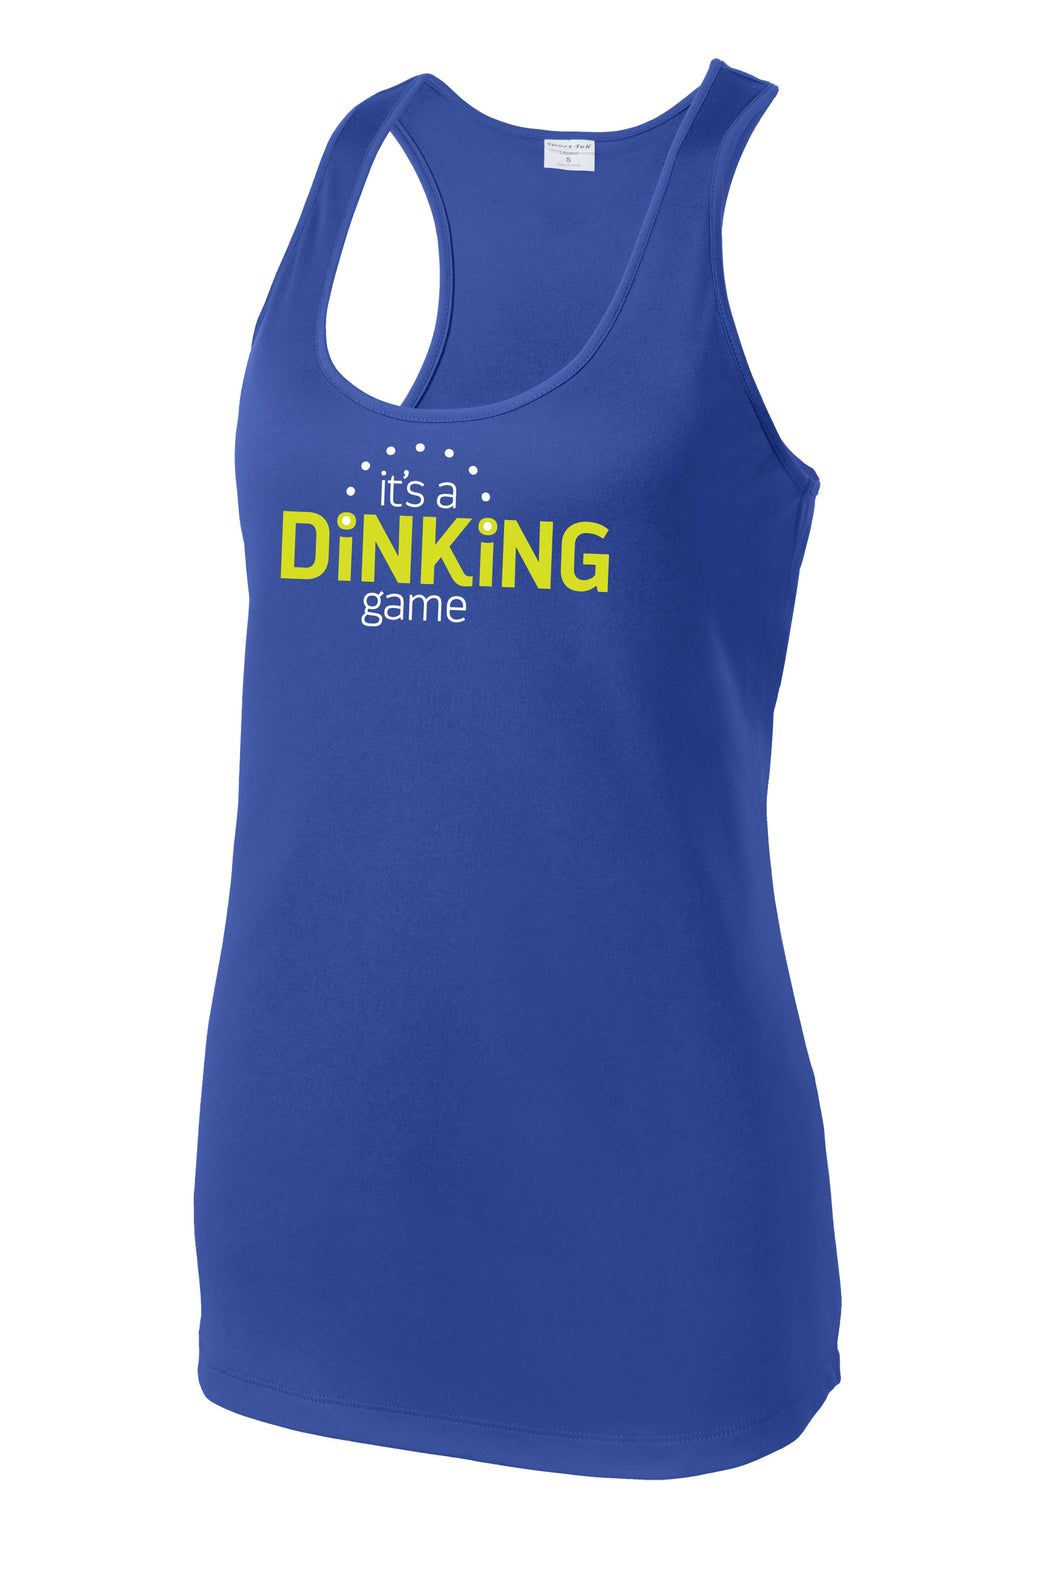 It's a Dinking Game - Womens Performance Racerback Tank